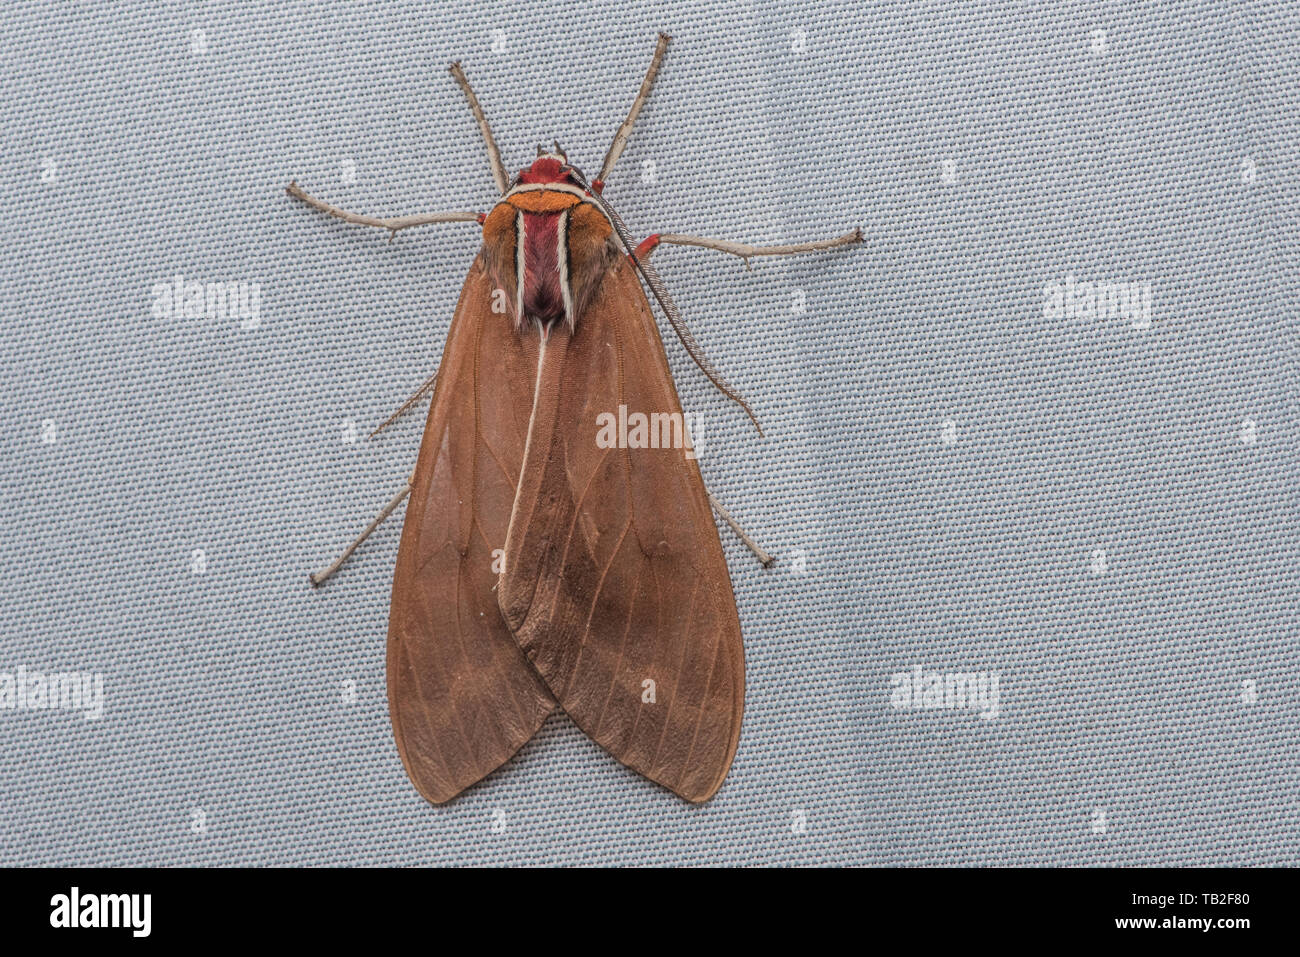 A macro photo of an Ecuadorian tiger moth from the Cloud forest. Stock Photo